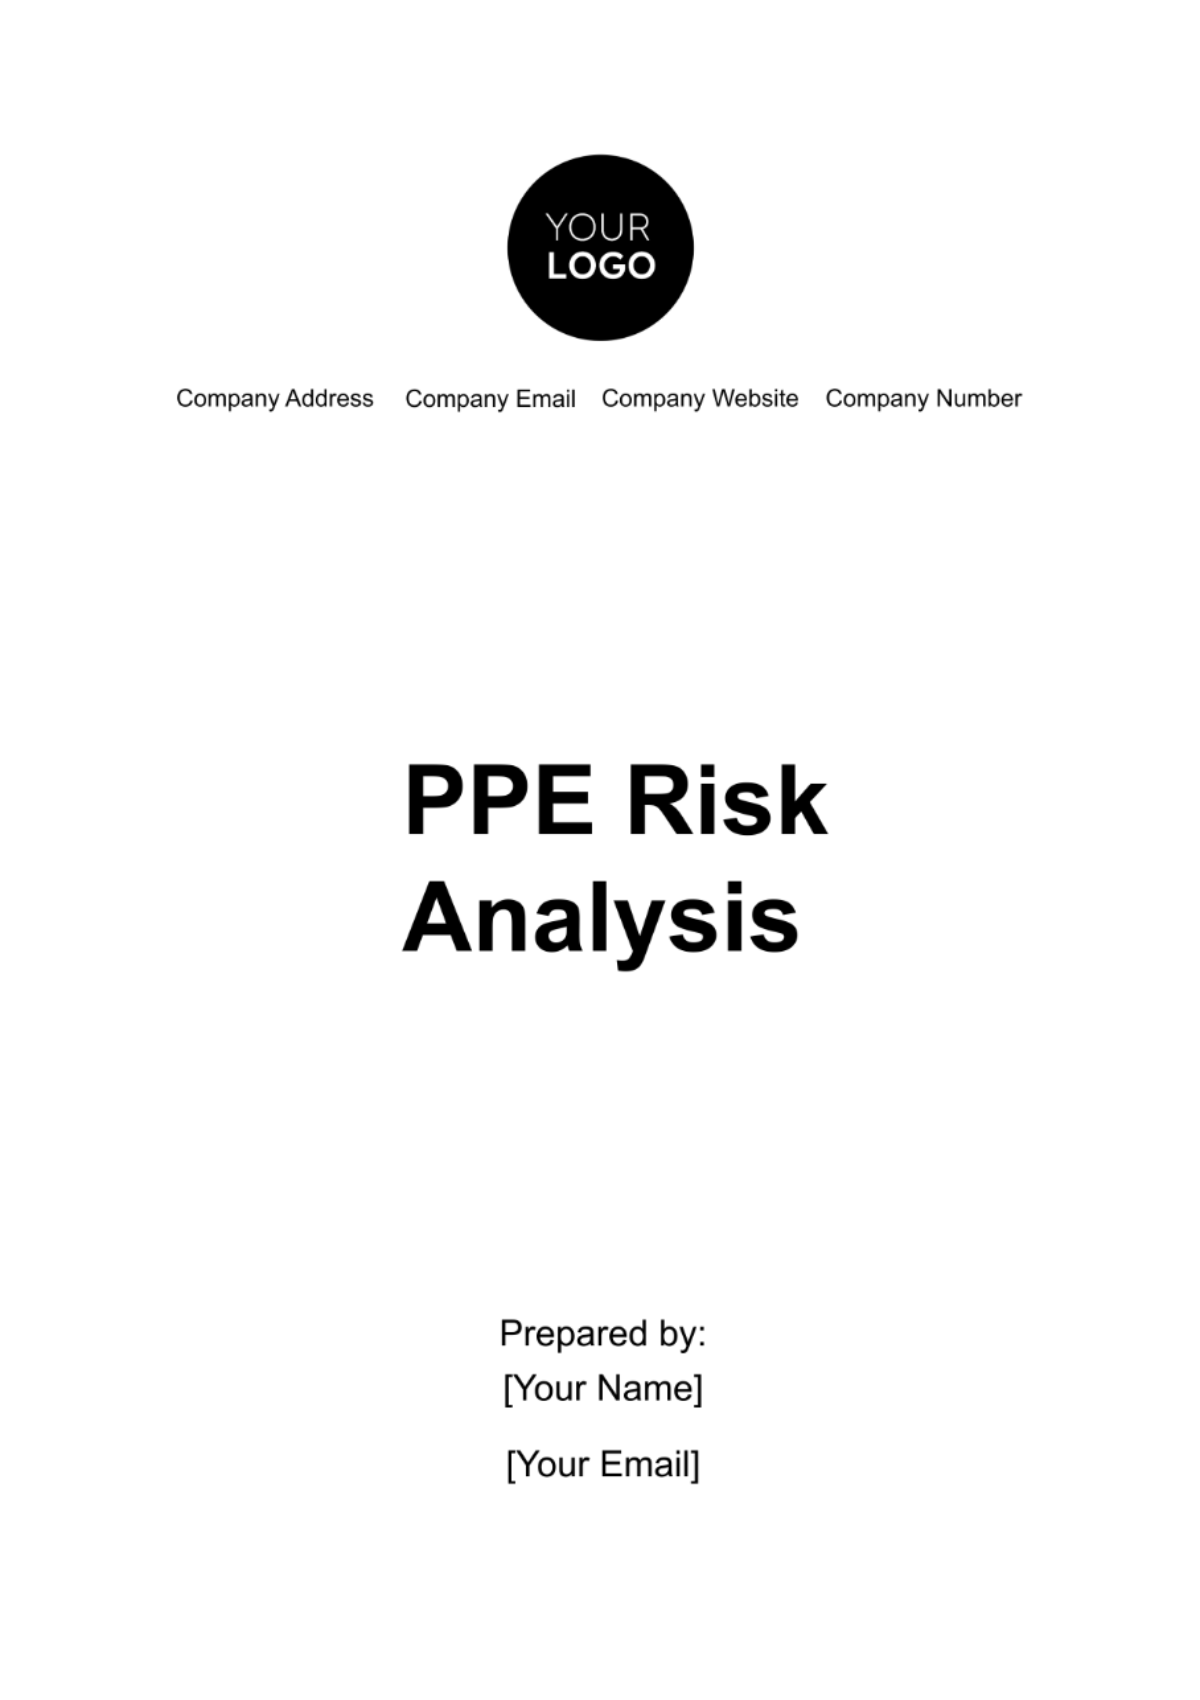 PPE Risk Analysis Template